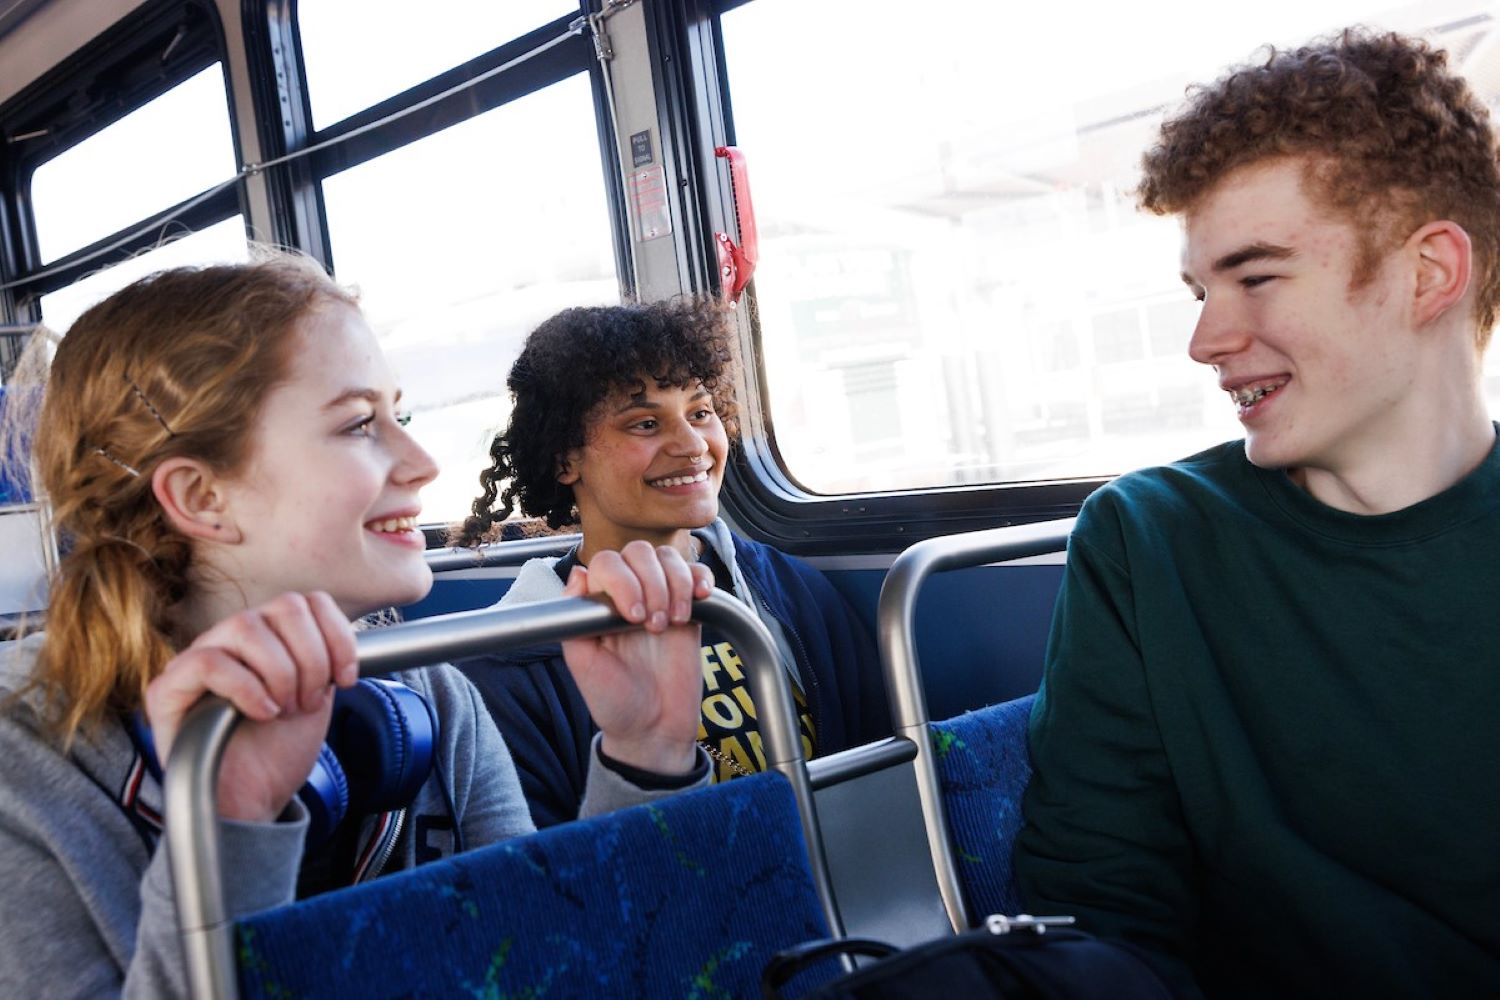 Apollo chats with his friends on the bus.